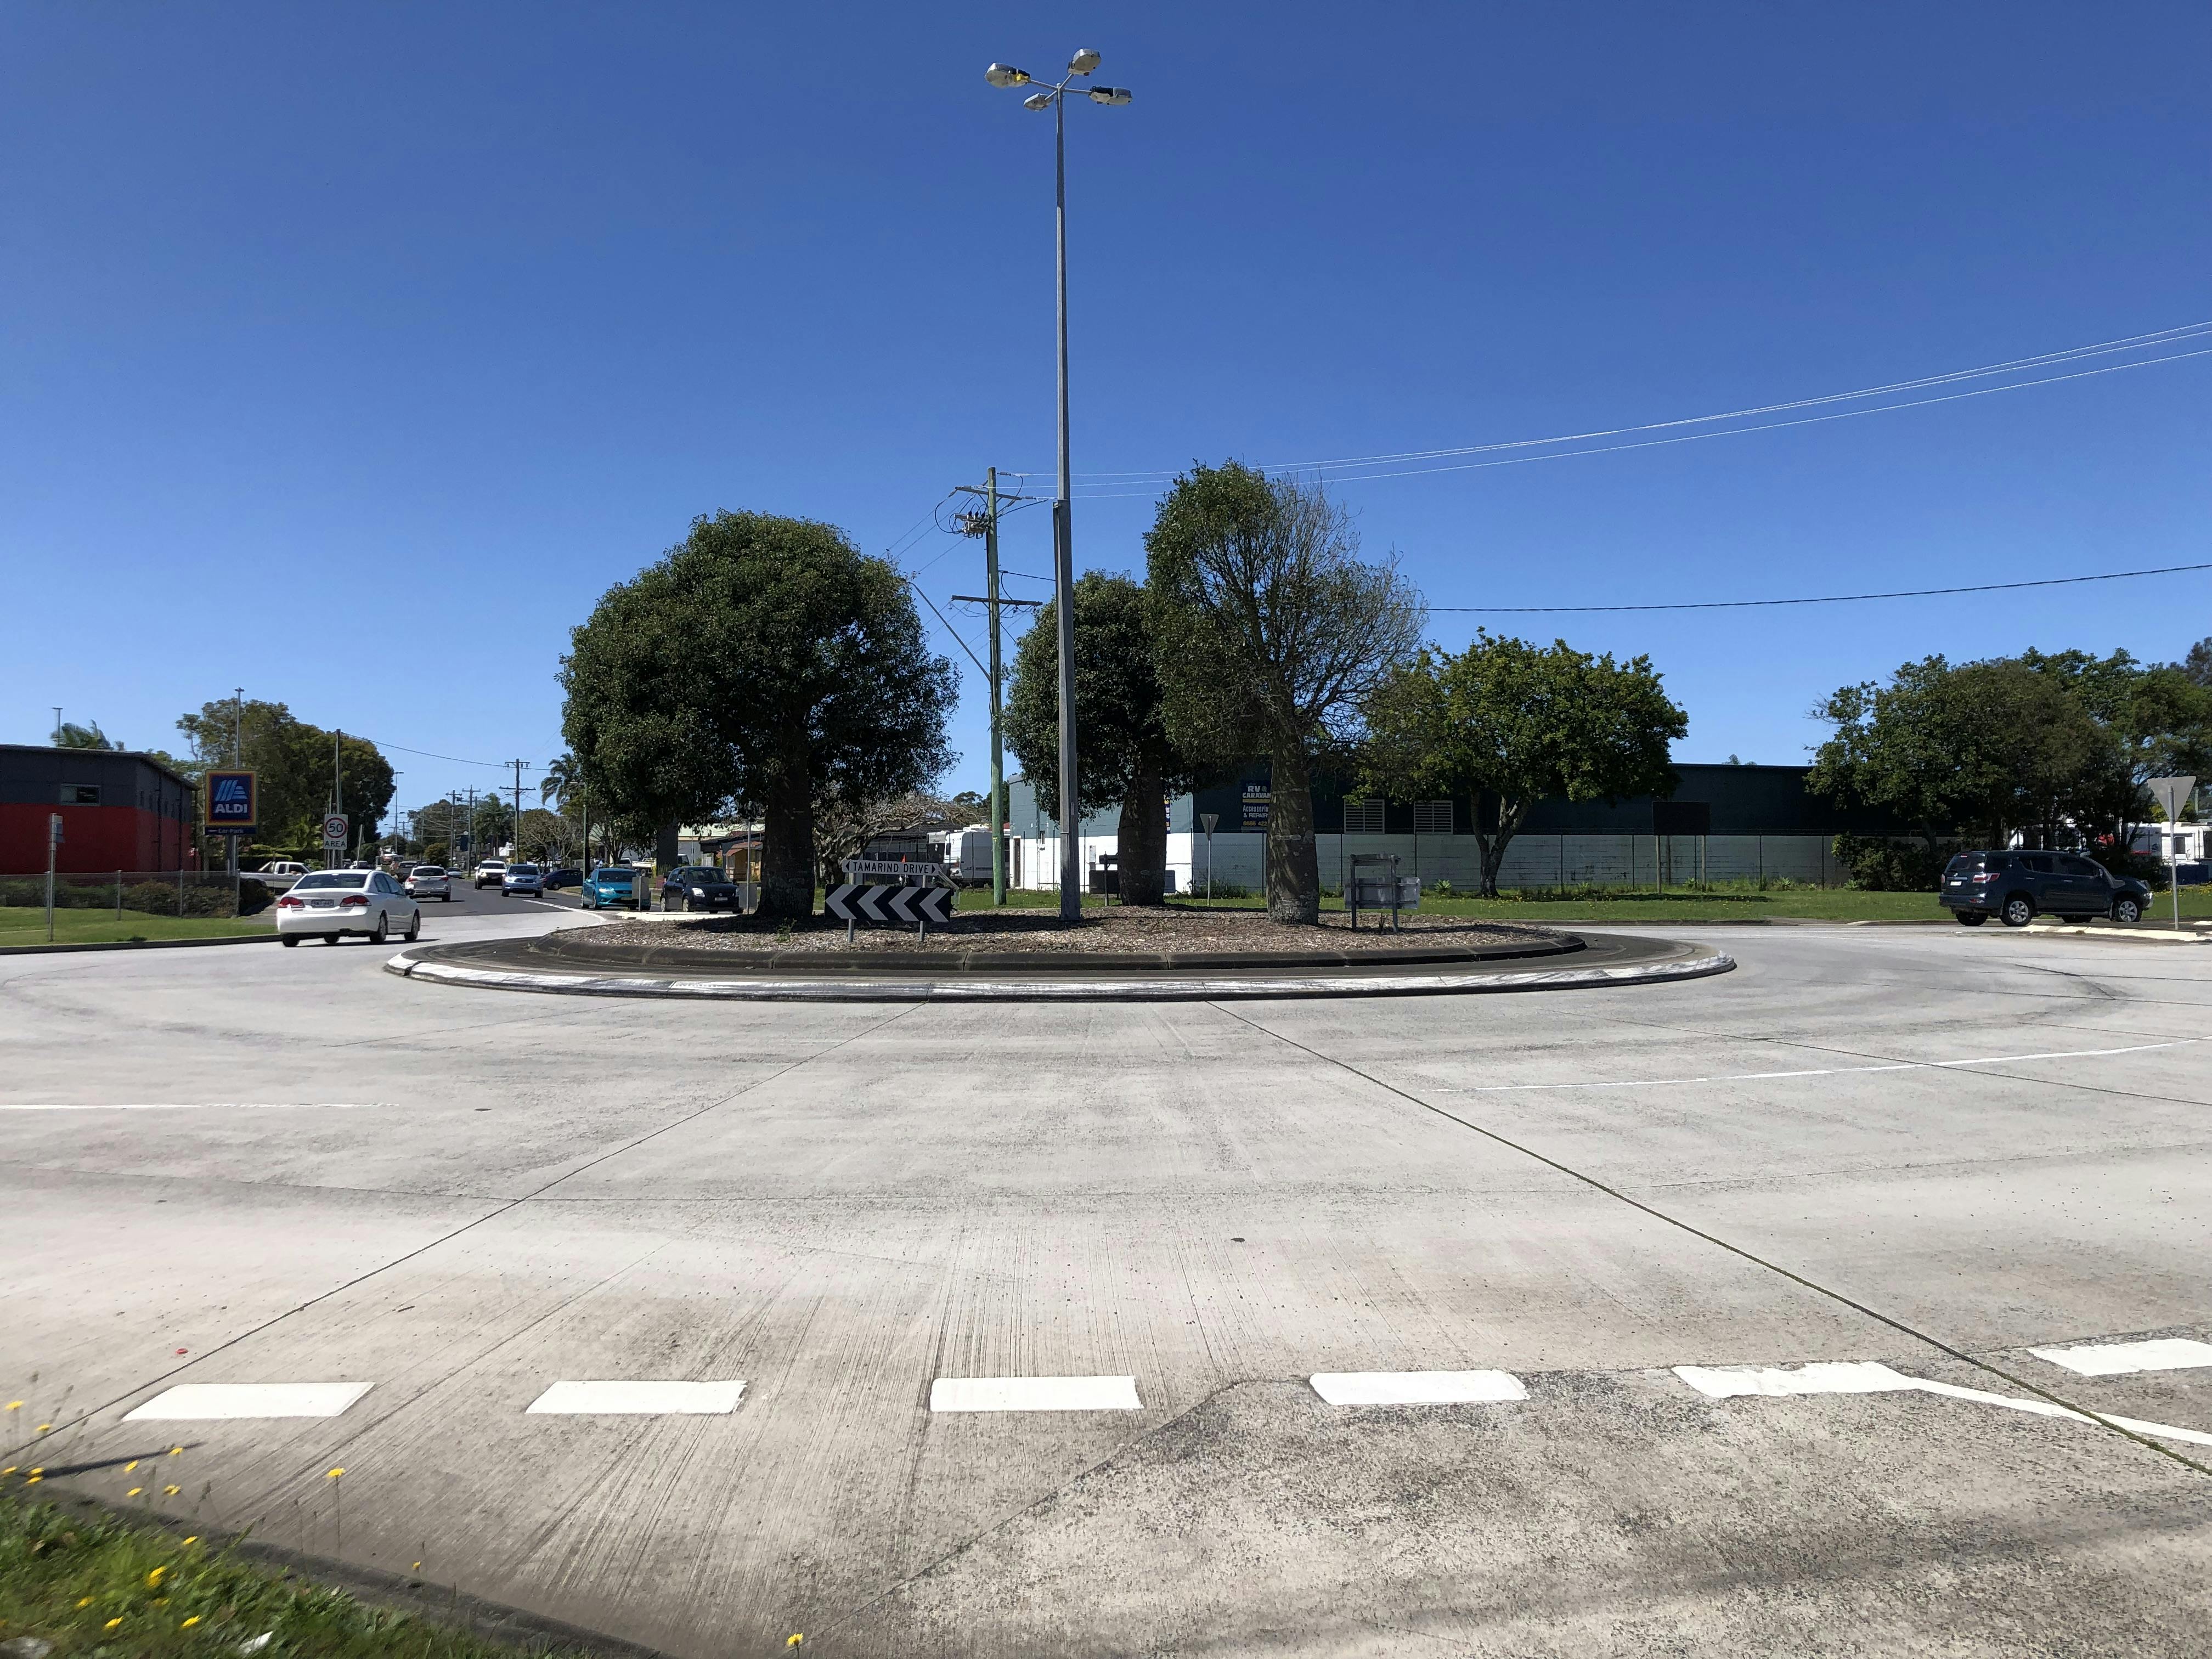 Tamarind Drive roundabout at Ferngrove Drive